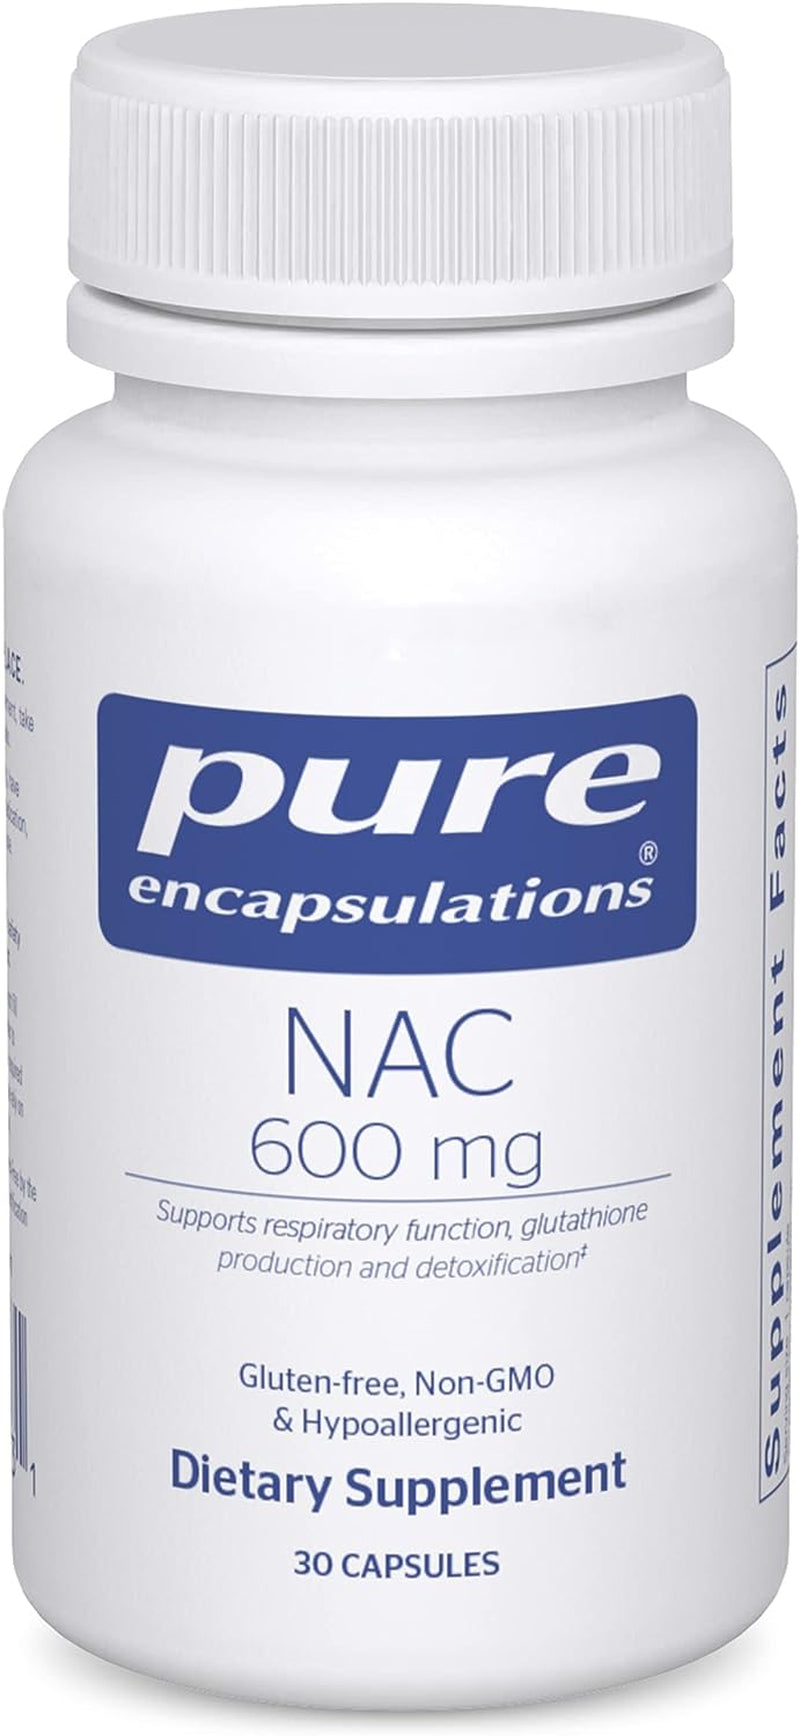 Pure Encapsulations NAC 600 Mg - N-Acetyl Cysteine NAC Supplement for Lung Health & Immune Support, Liver Support & Antioxidants* - with Freeform N-Acetyl-L-Cysteine - 30 Capsules